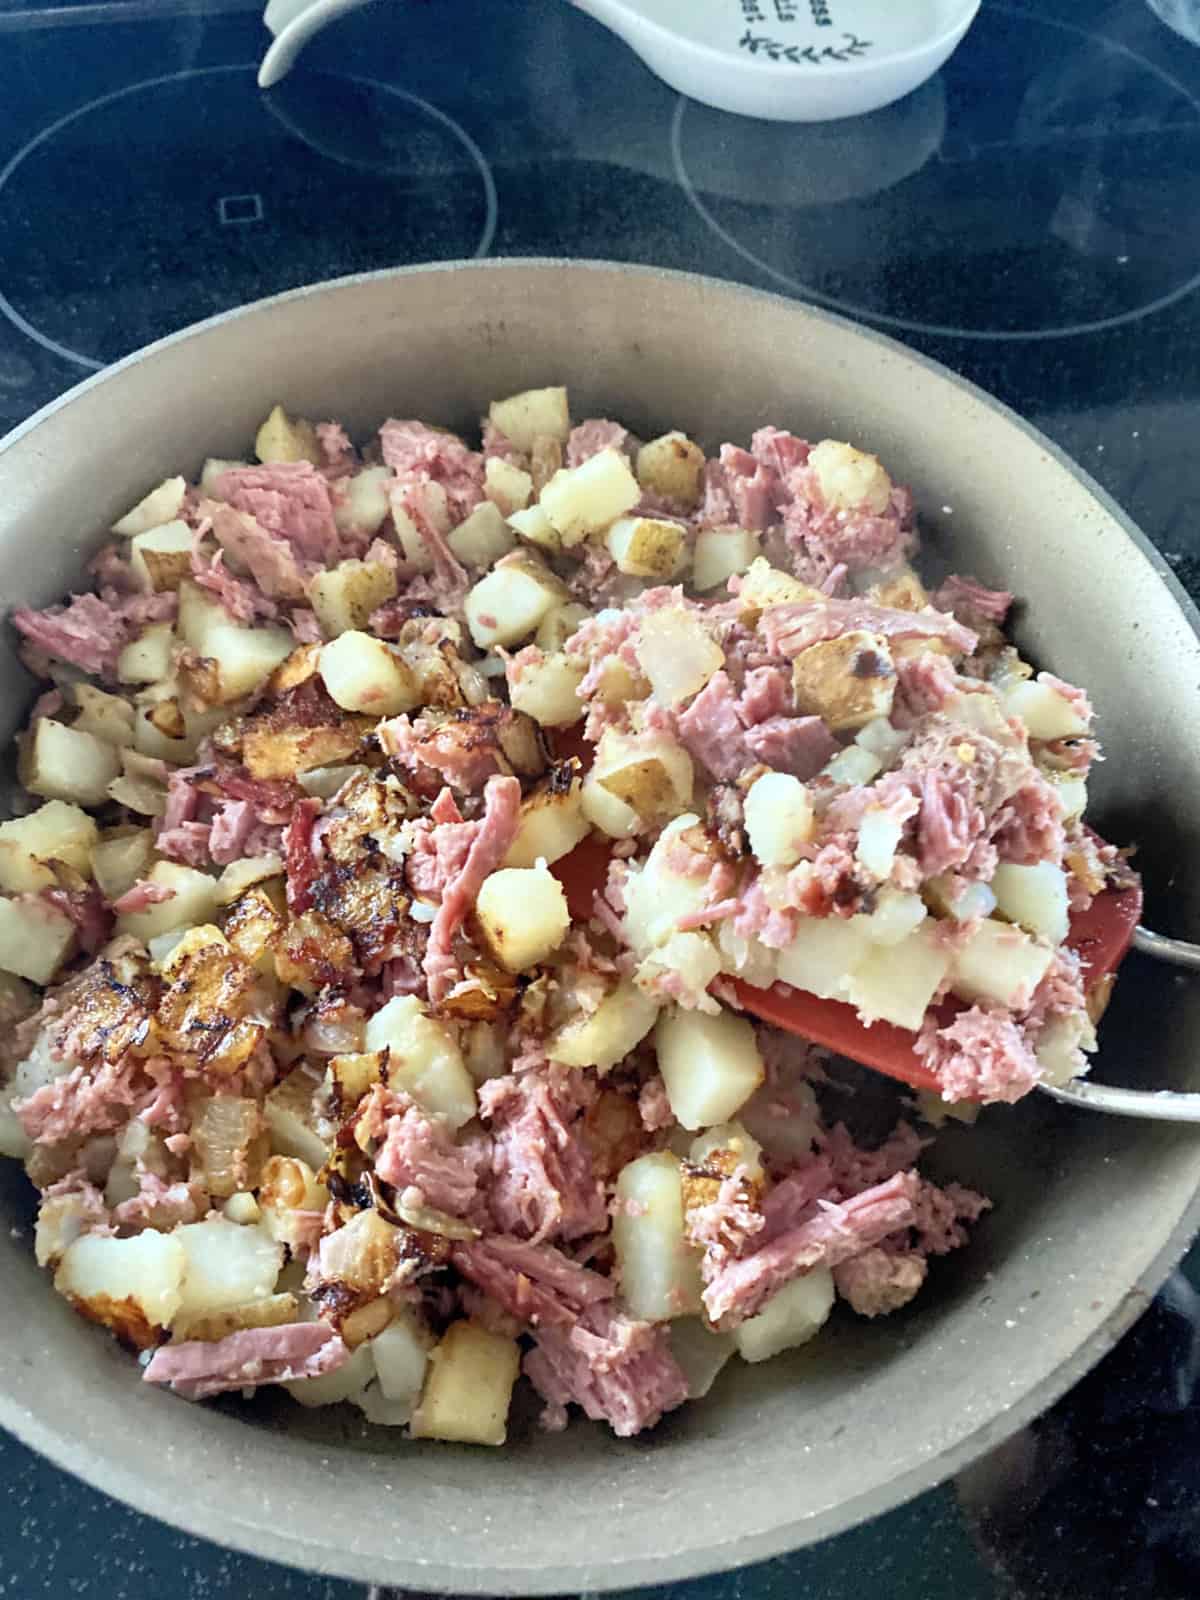 Skillet filled with Corned Beef Hash with red spatula picking up the hash to flip.